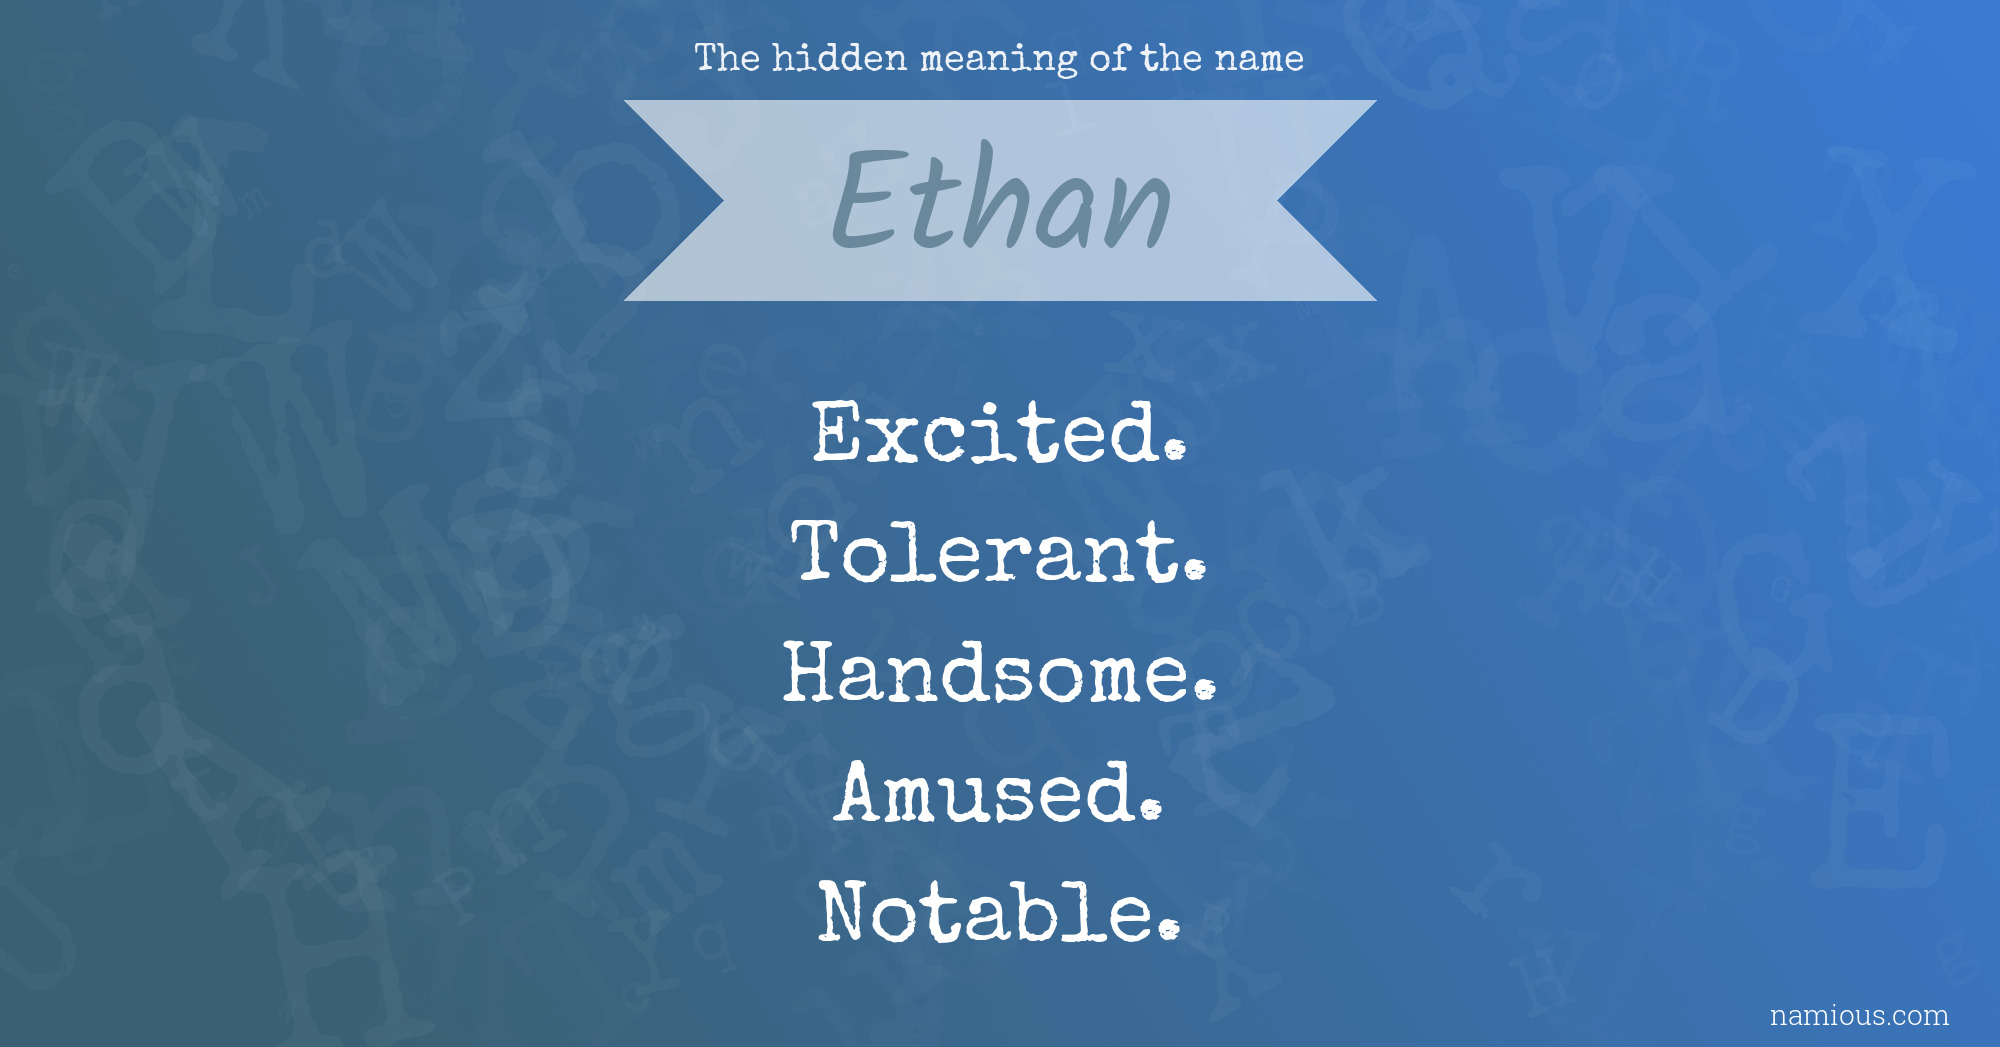 The hidden meaning of the name Ethan